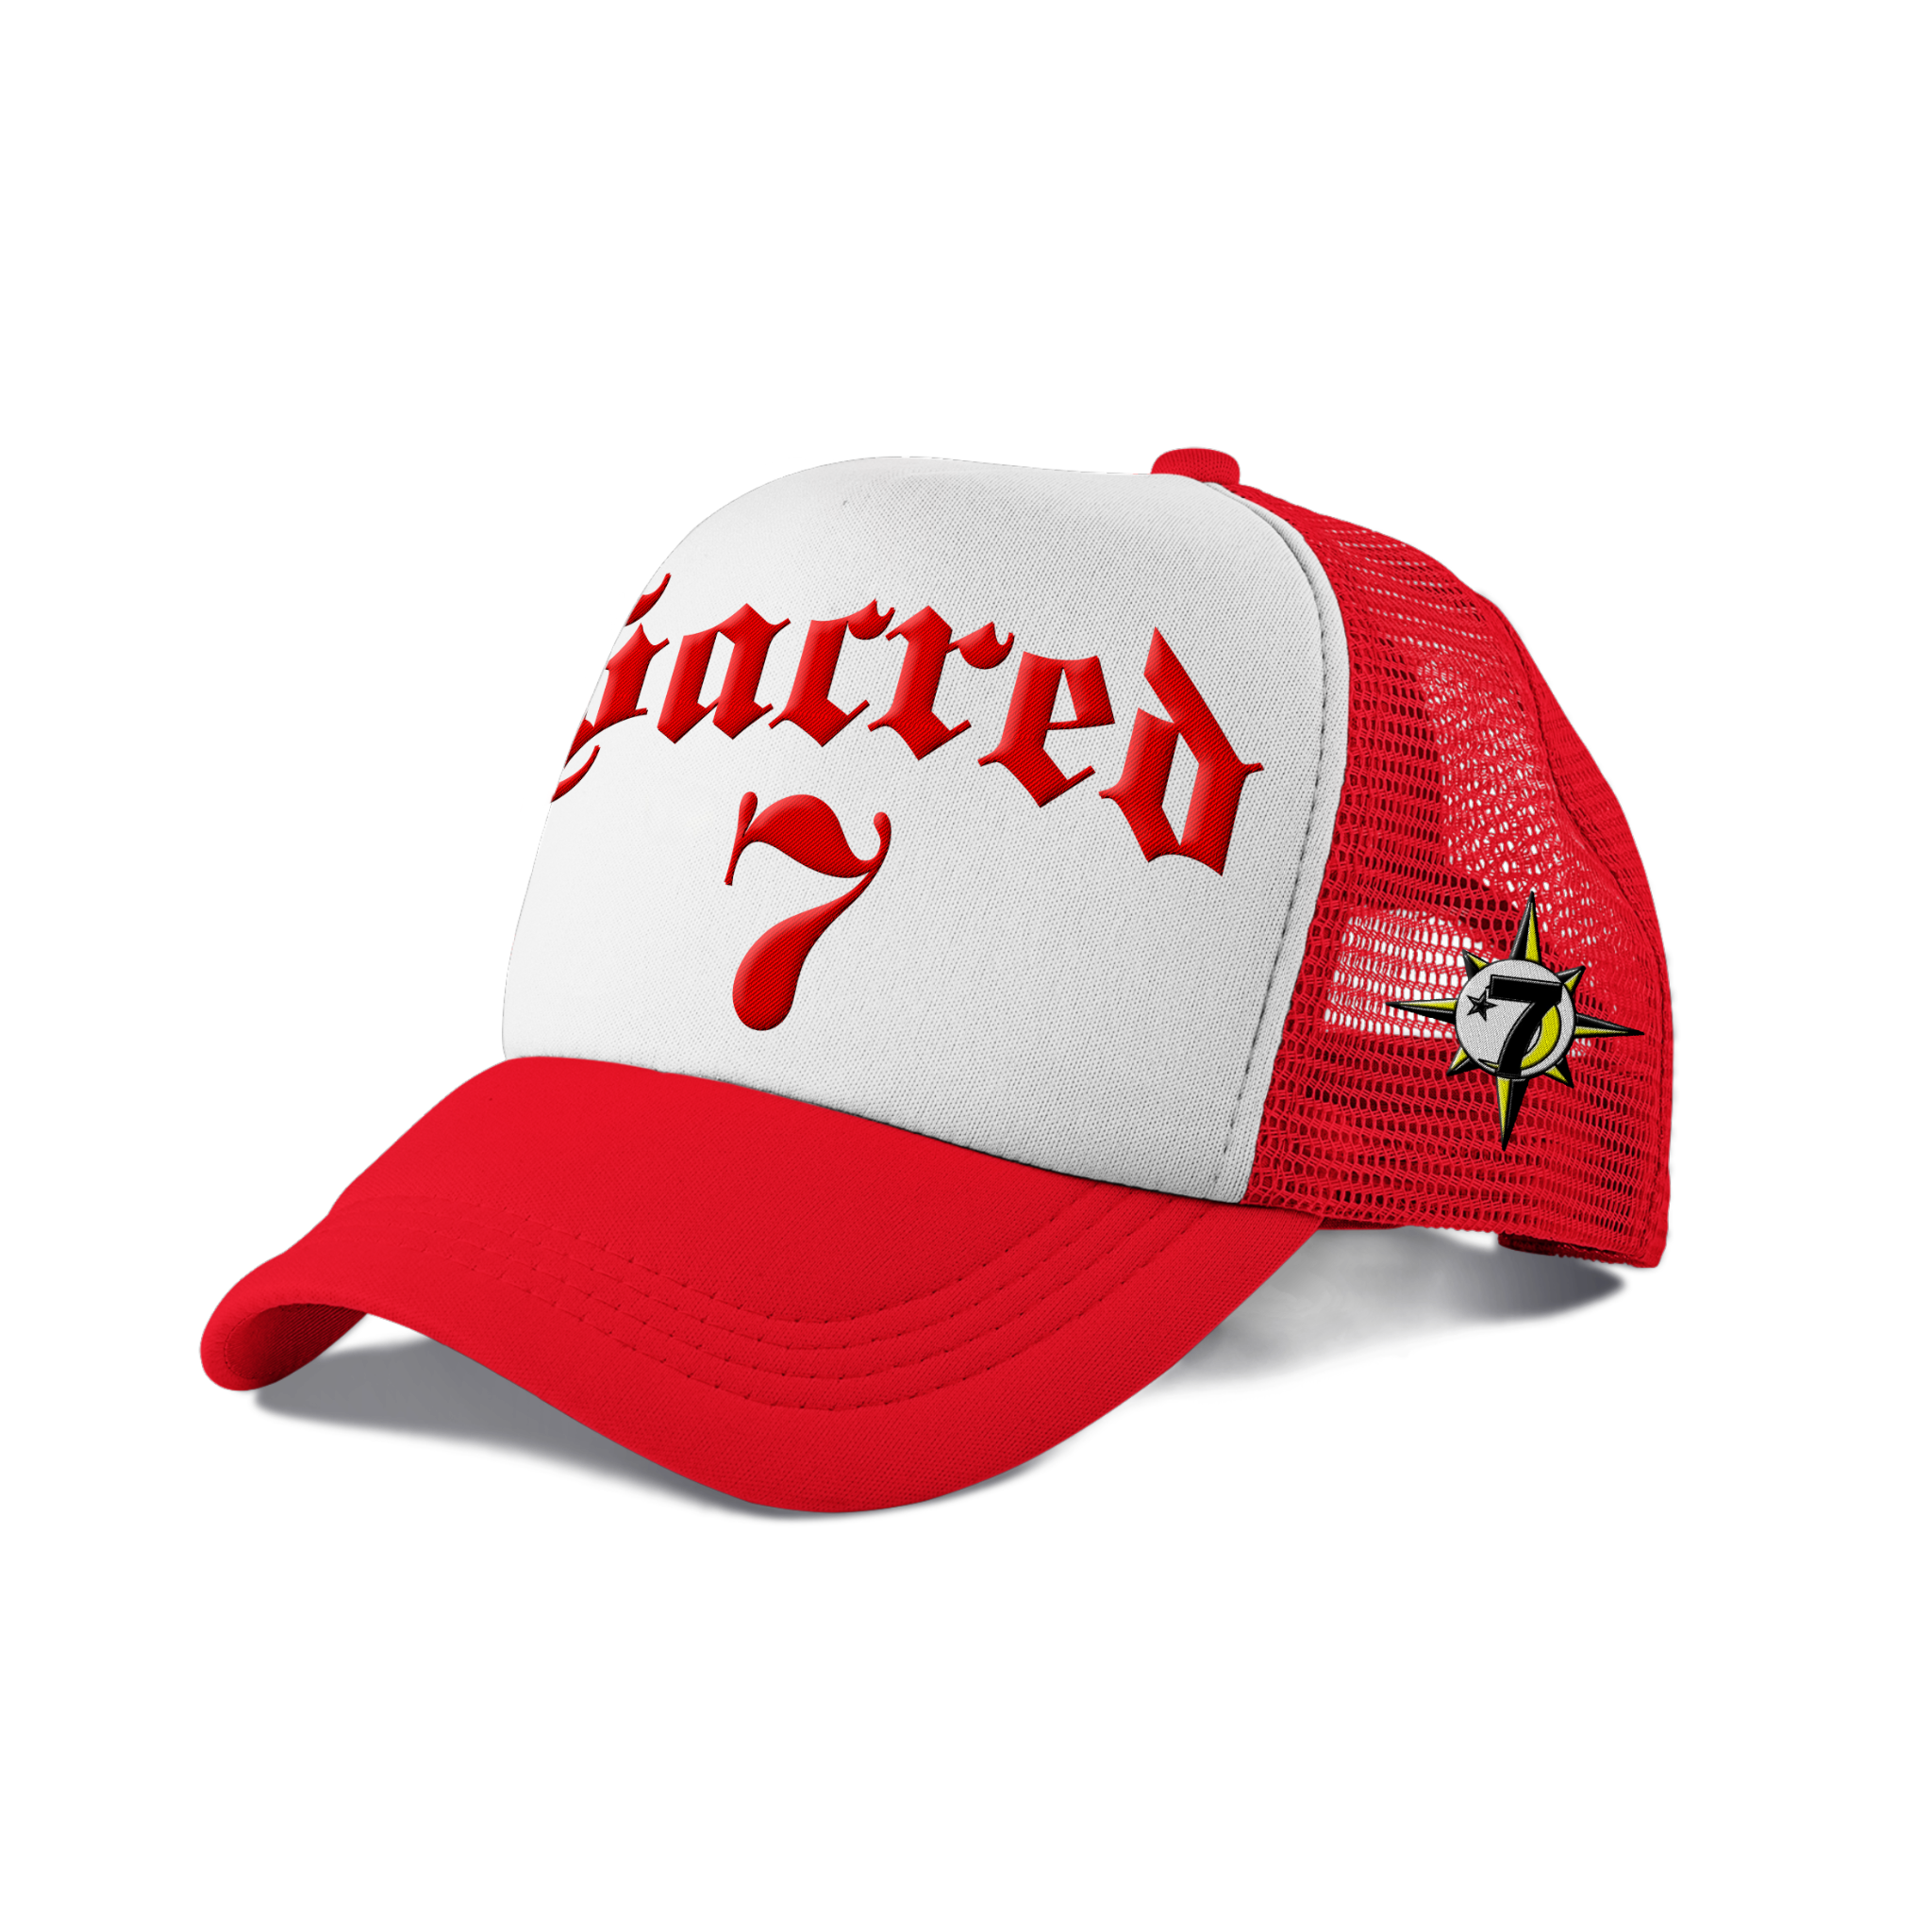 Sacred 7 Embroidered Trucker - White & Red W/ Red